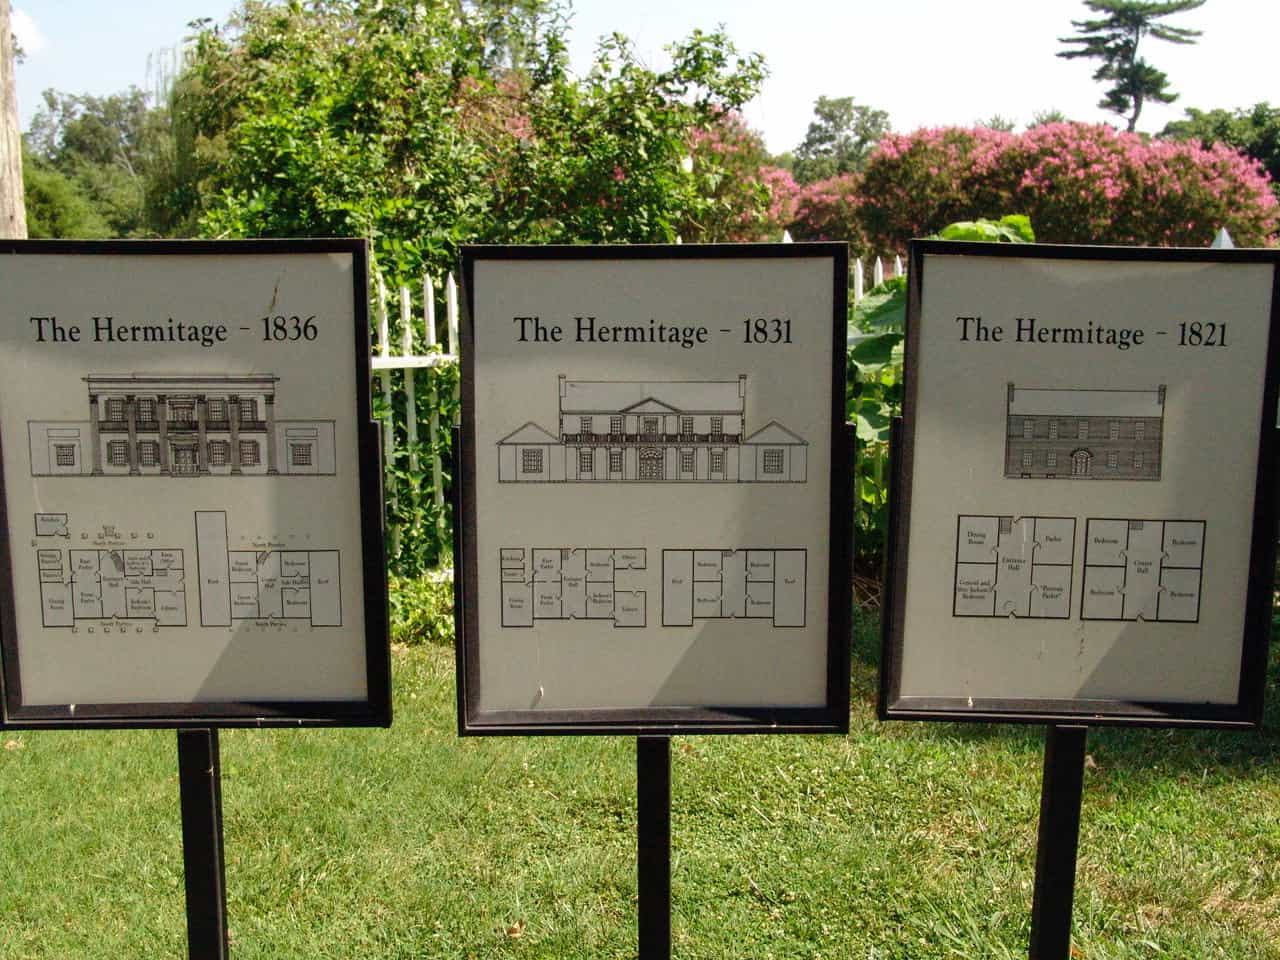 Drawings of the mansion renovations at The Hermitage in Nashville, Tennessee